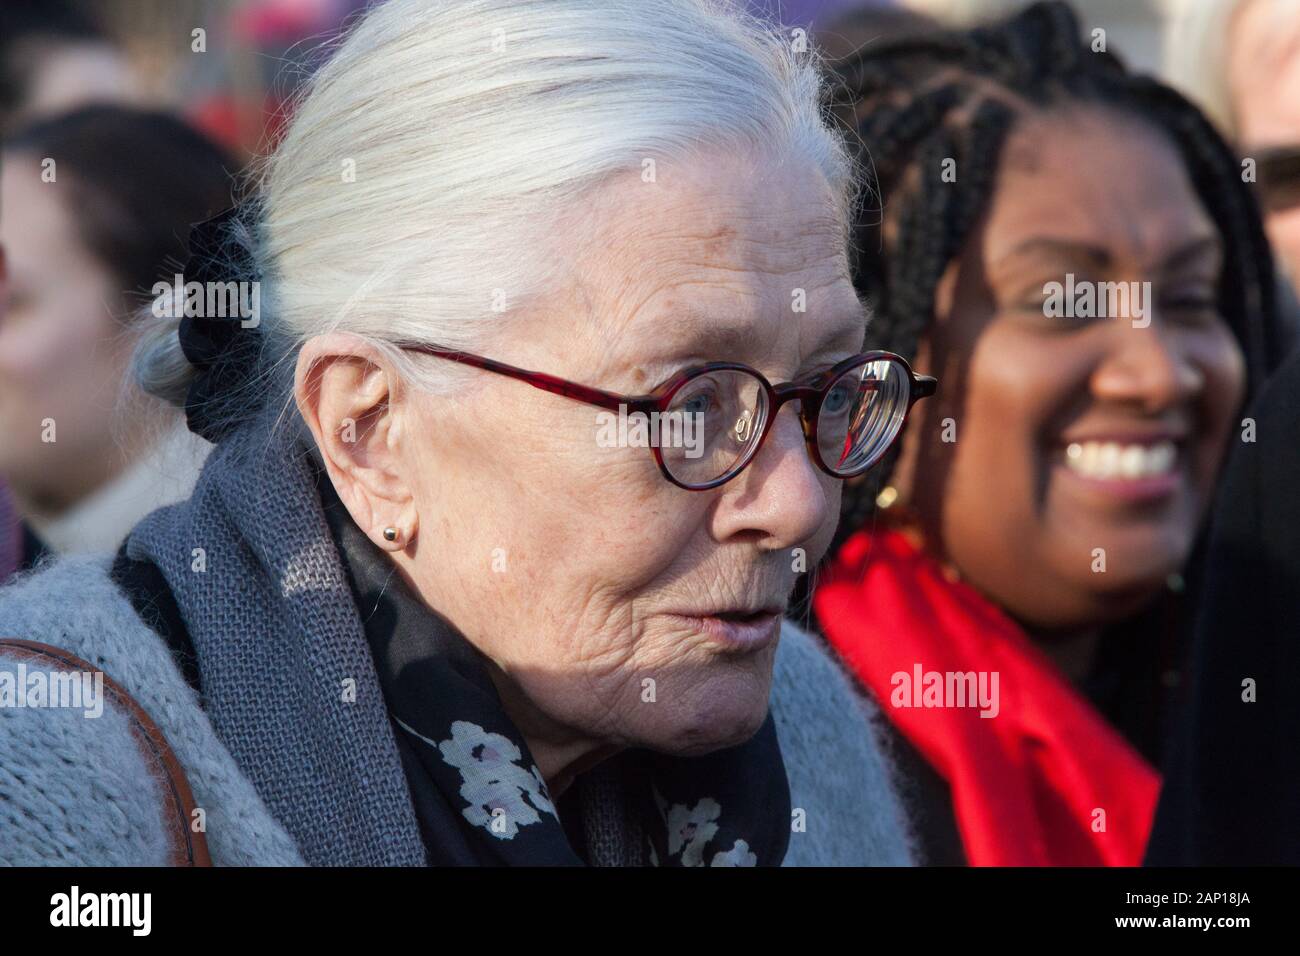 Westminster, UK, 20 Jan 2020: Vanessa Redgrave at a rally outside Parliament to demand fair treatment for child refugees trying to join their families in the UK. Anna Watson/Alamy Live News Stock Photo